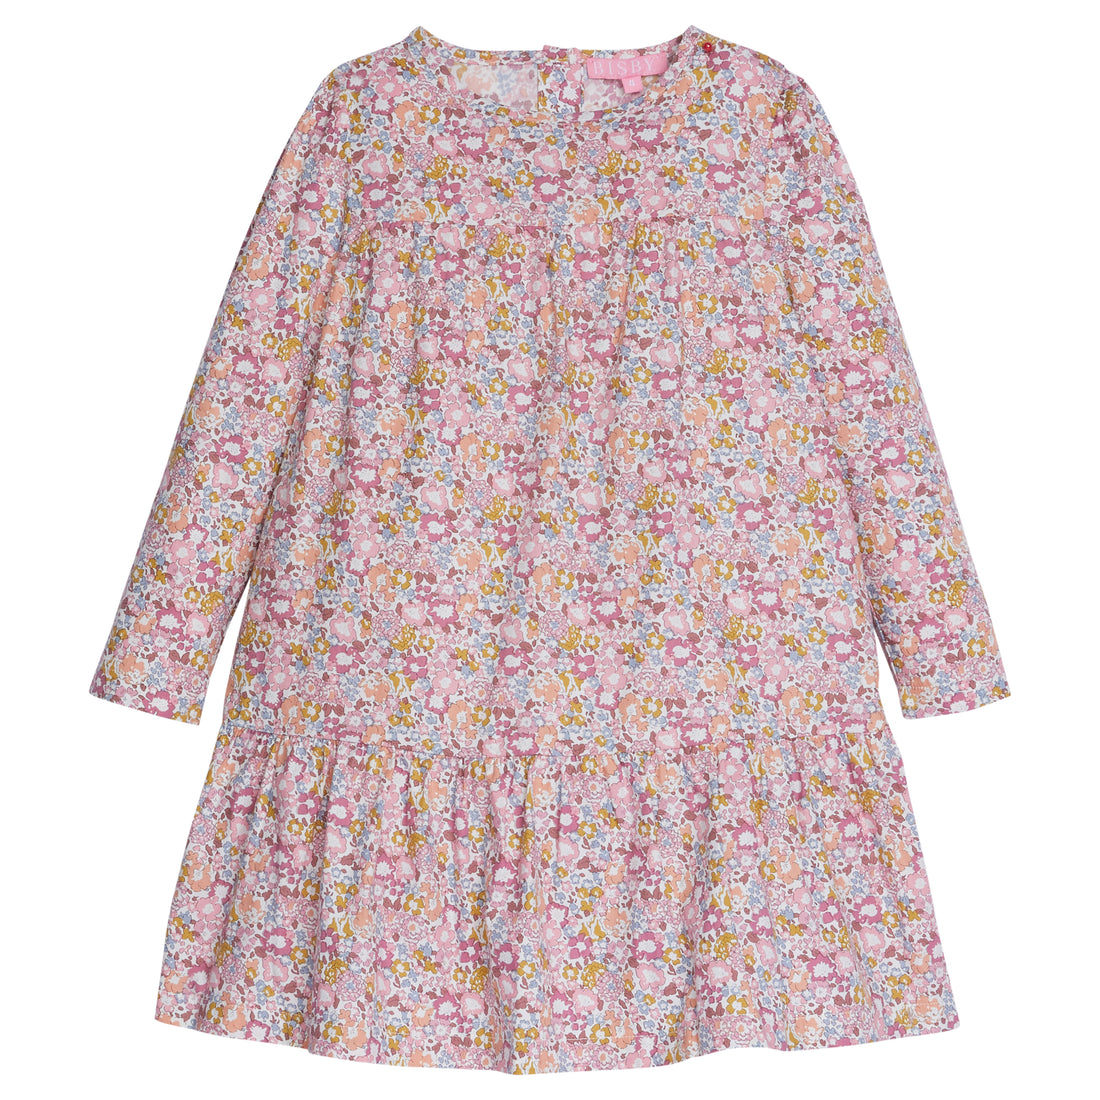 Our Lisle dress is back in our Radnor Rose print. This print is made up of pink and orange colored flowers with hints of blue as well. This dress has tiers to it and is long sleeve with button at the back--BISBY girl